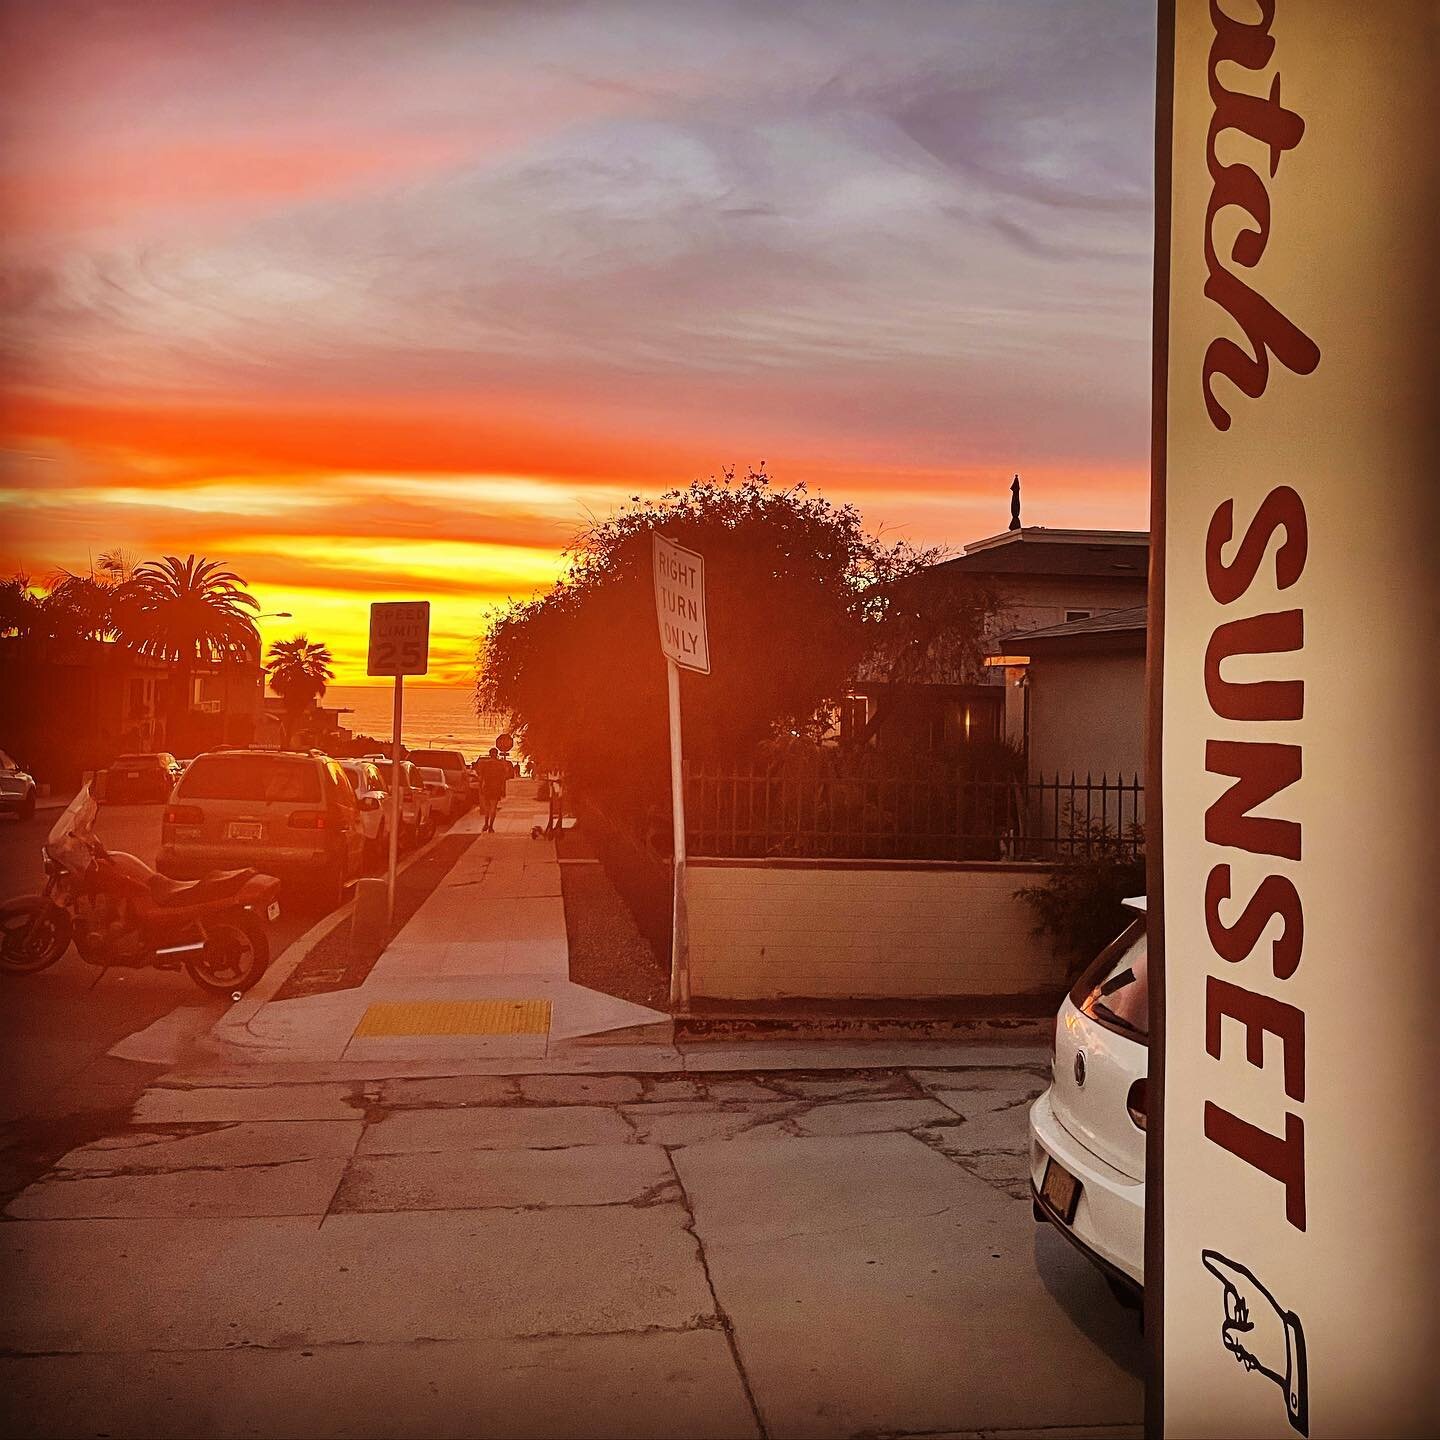 Sunsets and APM pizza... two things that make living in La Jolla special!  We&rsquo;re always looking forward to sharing them with you. #sunsetsandpizzaareforsharing #behomefordinner #qualityfoodforqualitytime #takenbake #takenbakesandiego #sandiegop